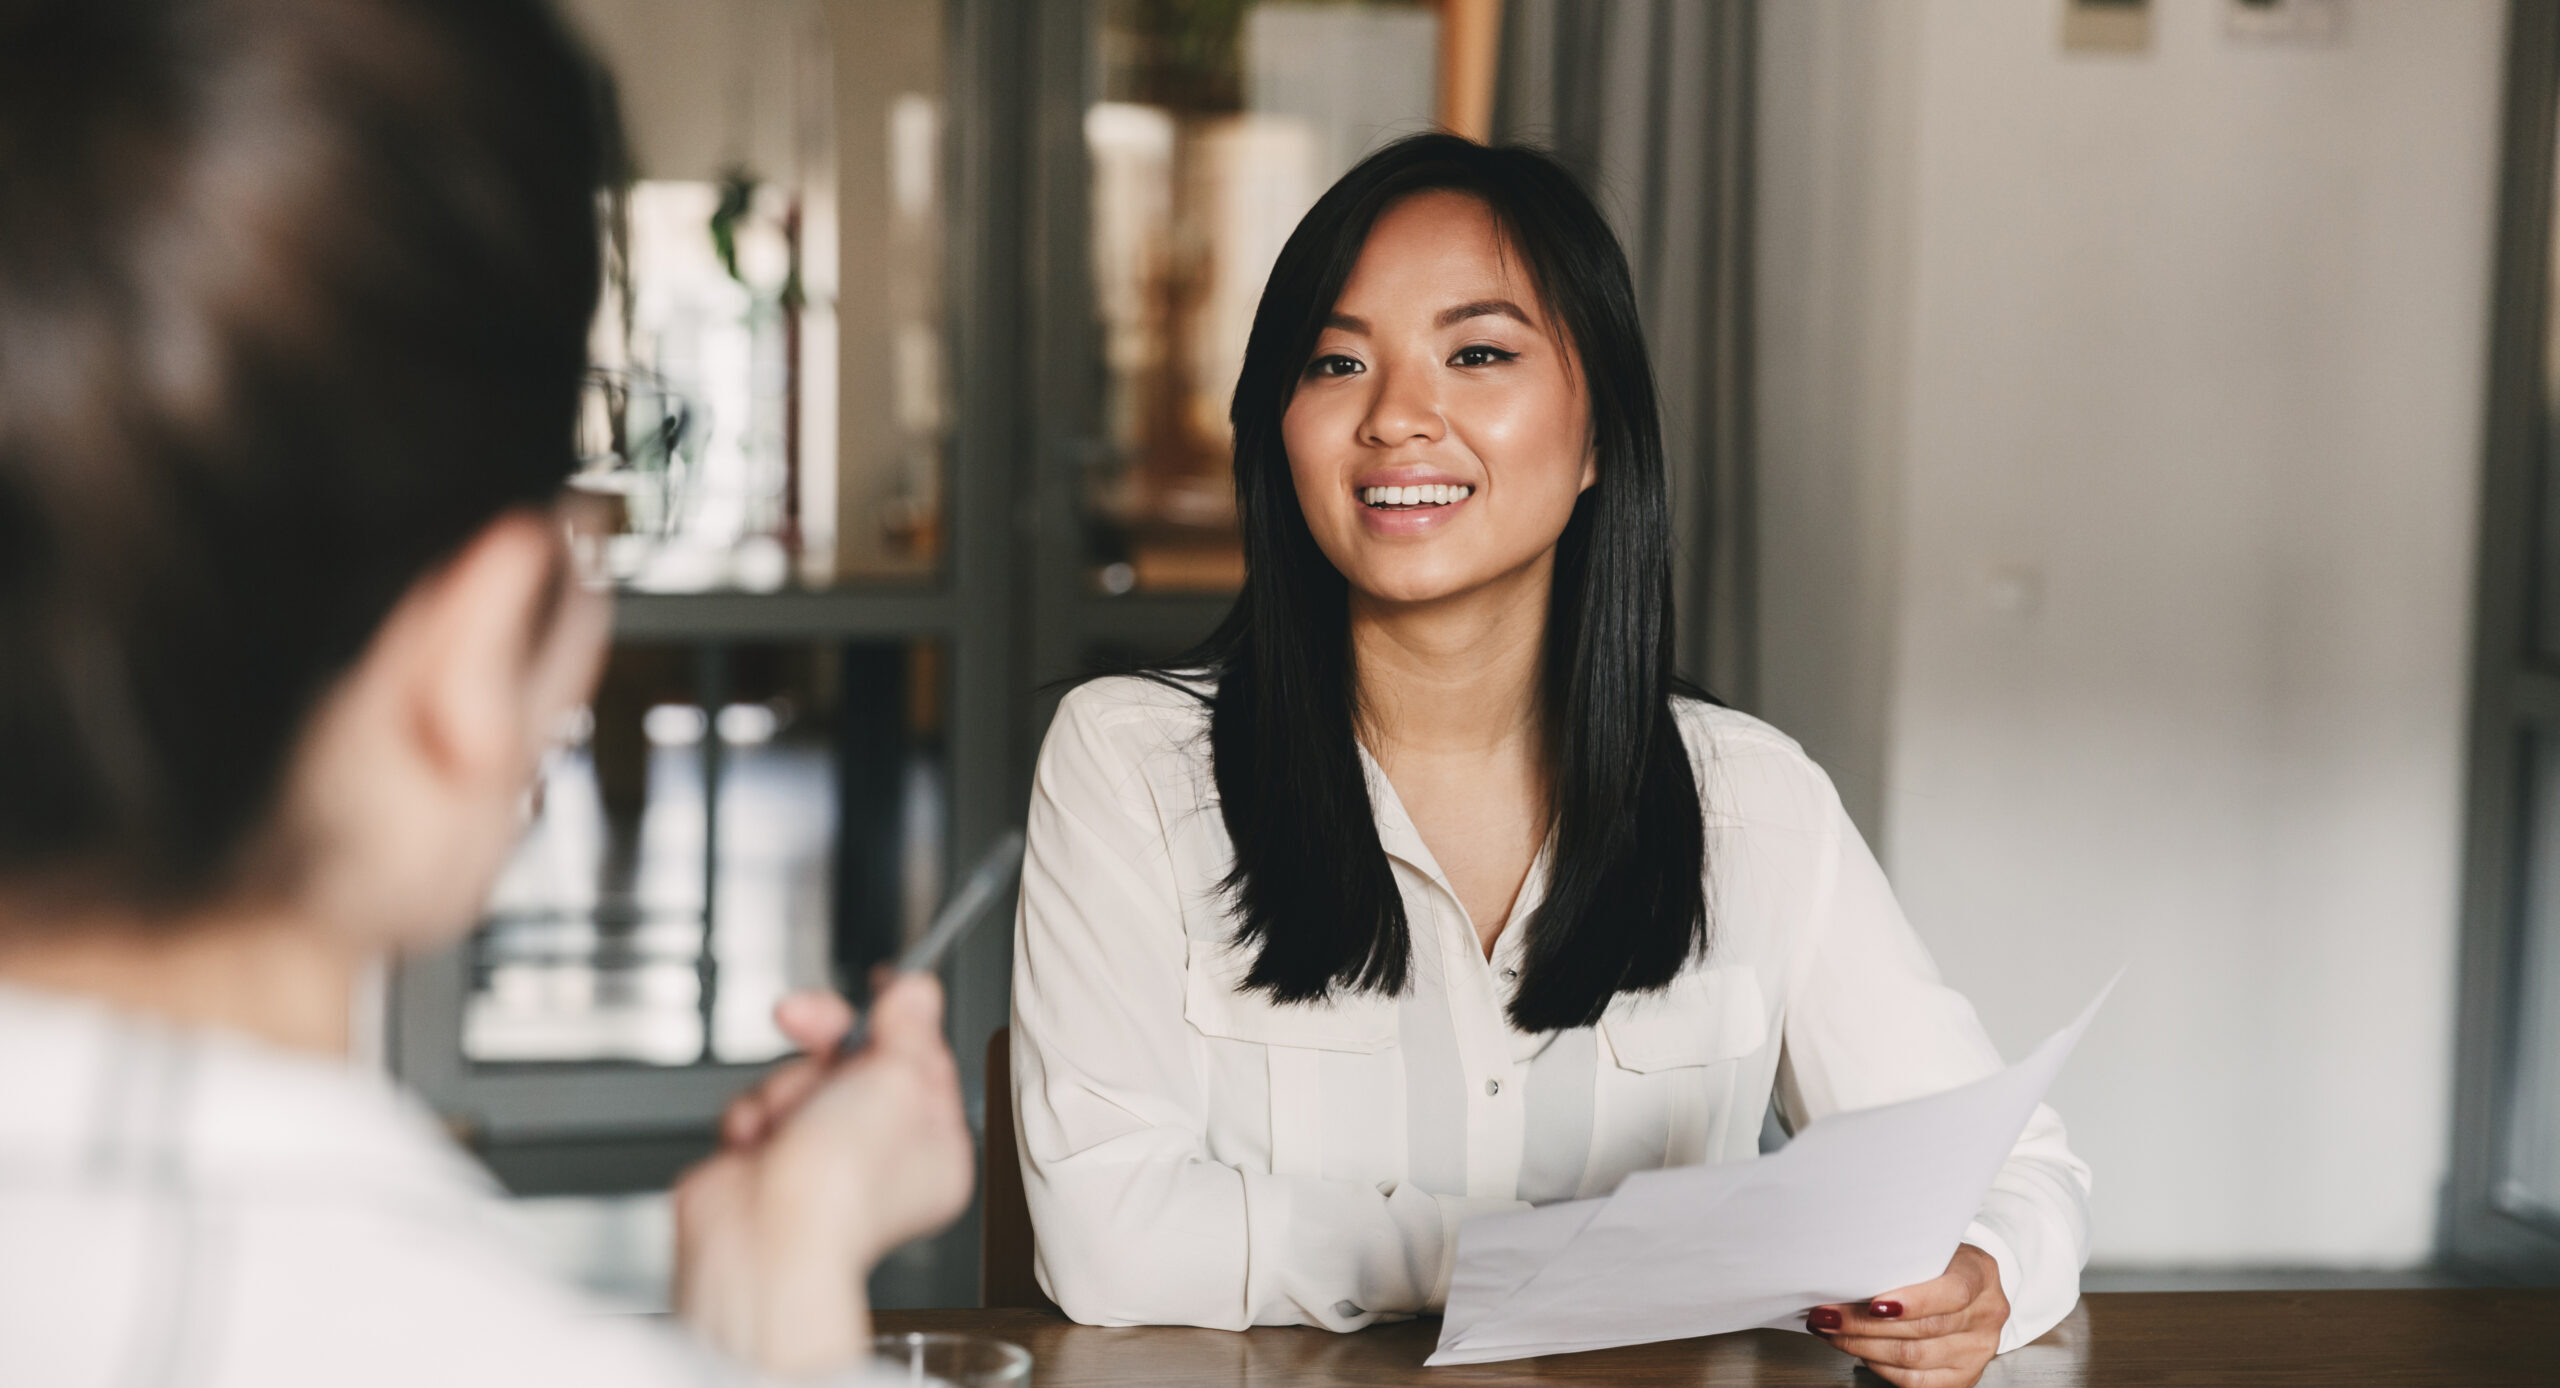 Business, career and placement concept - joyful asian woman smiling and holding resume while sitting in front of directors during corporate meeting or job interview